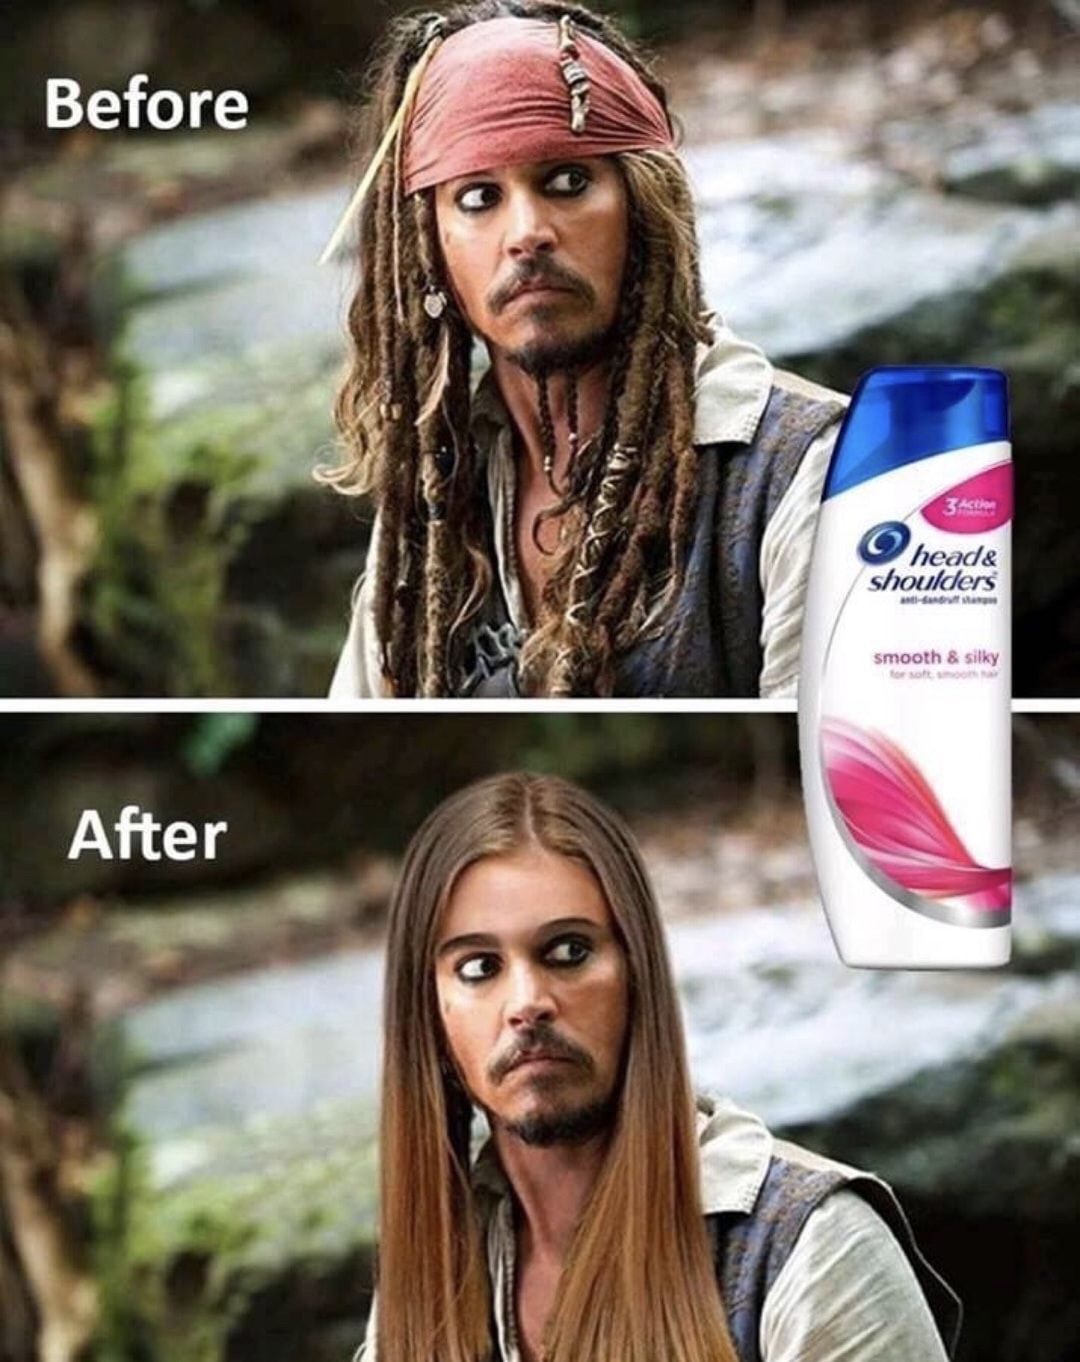 Jack Sparrow meme of Johnny Depp with slick hair after head and shoulders use